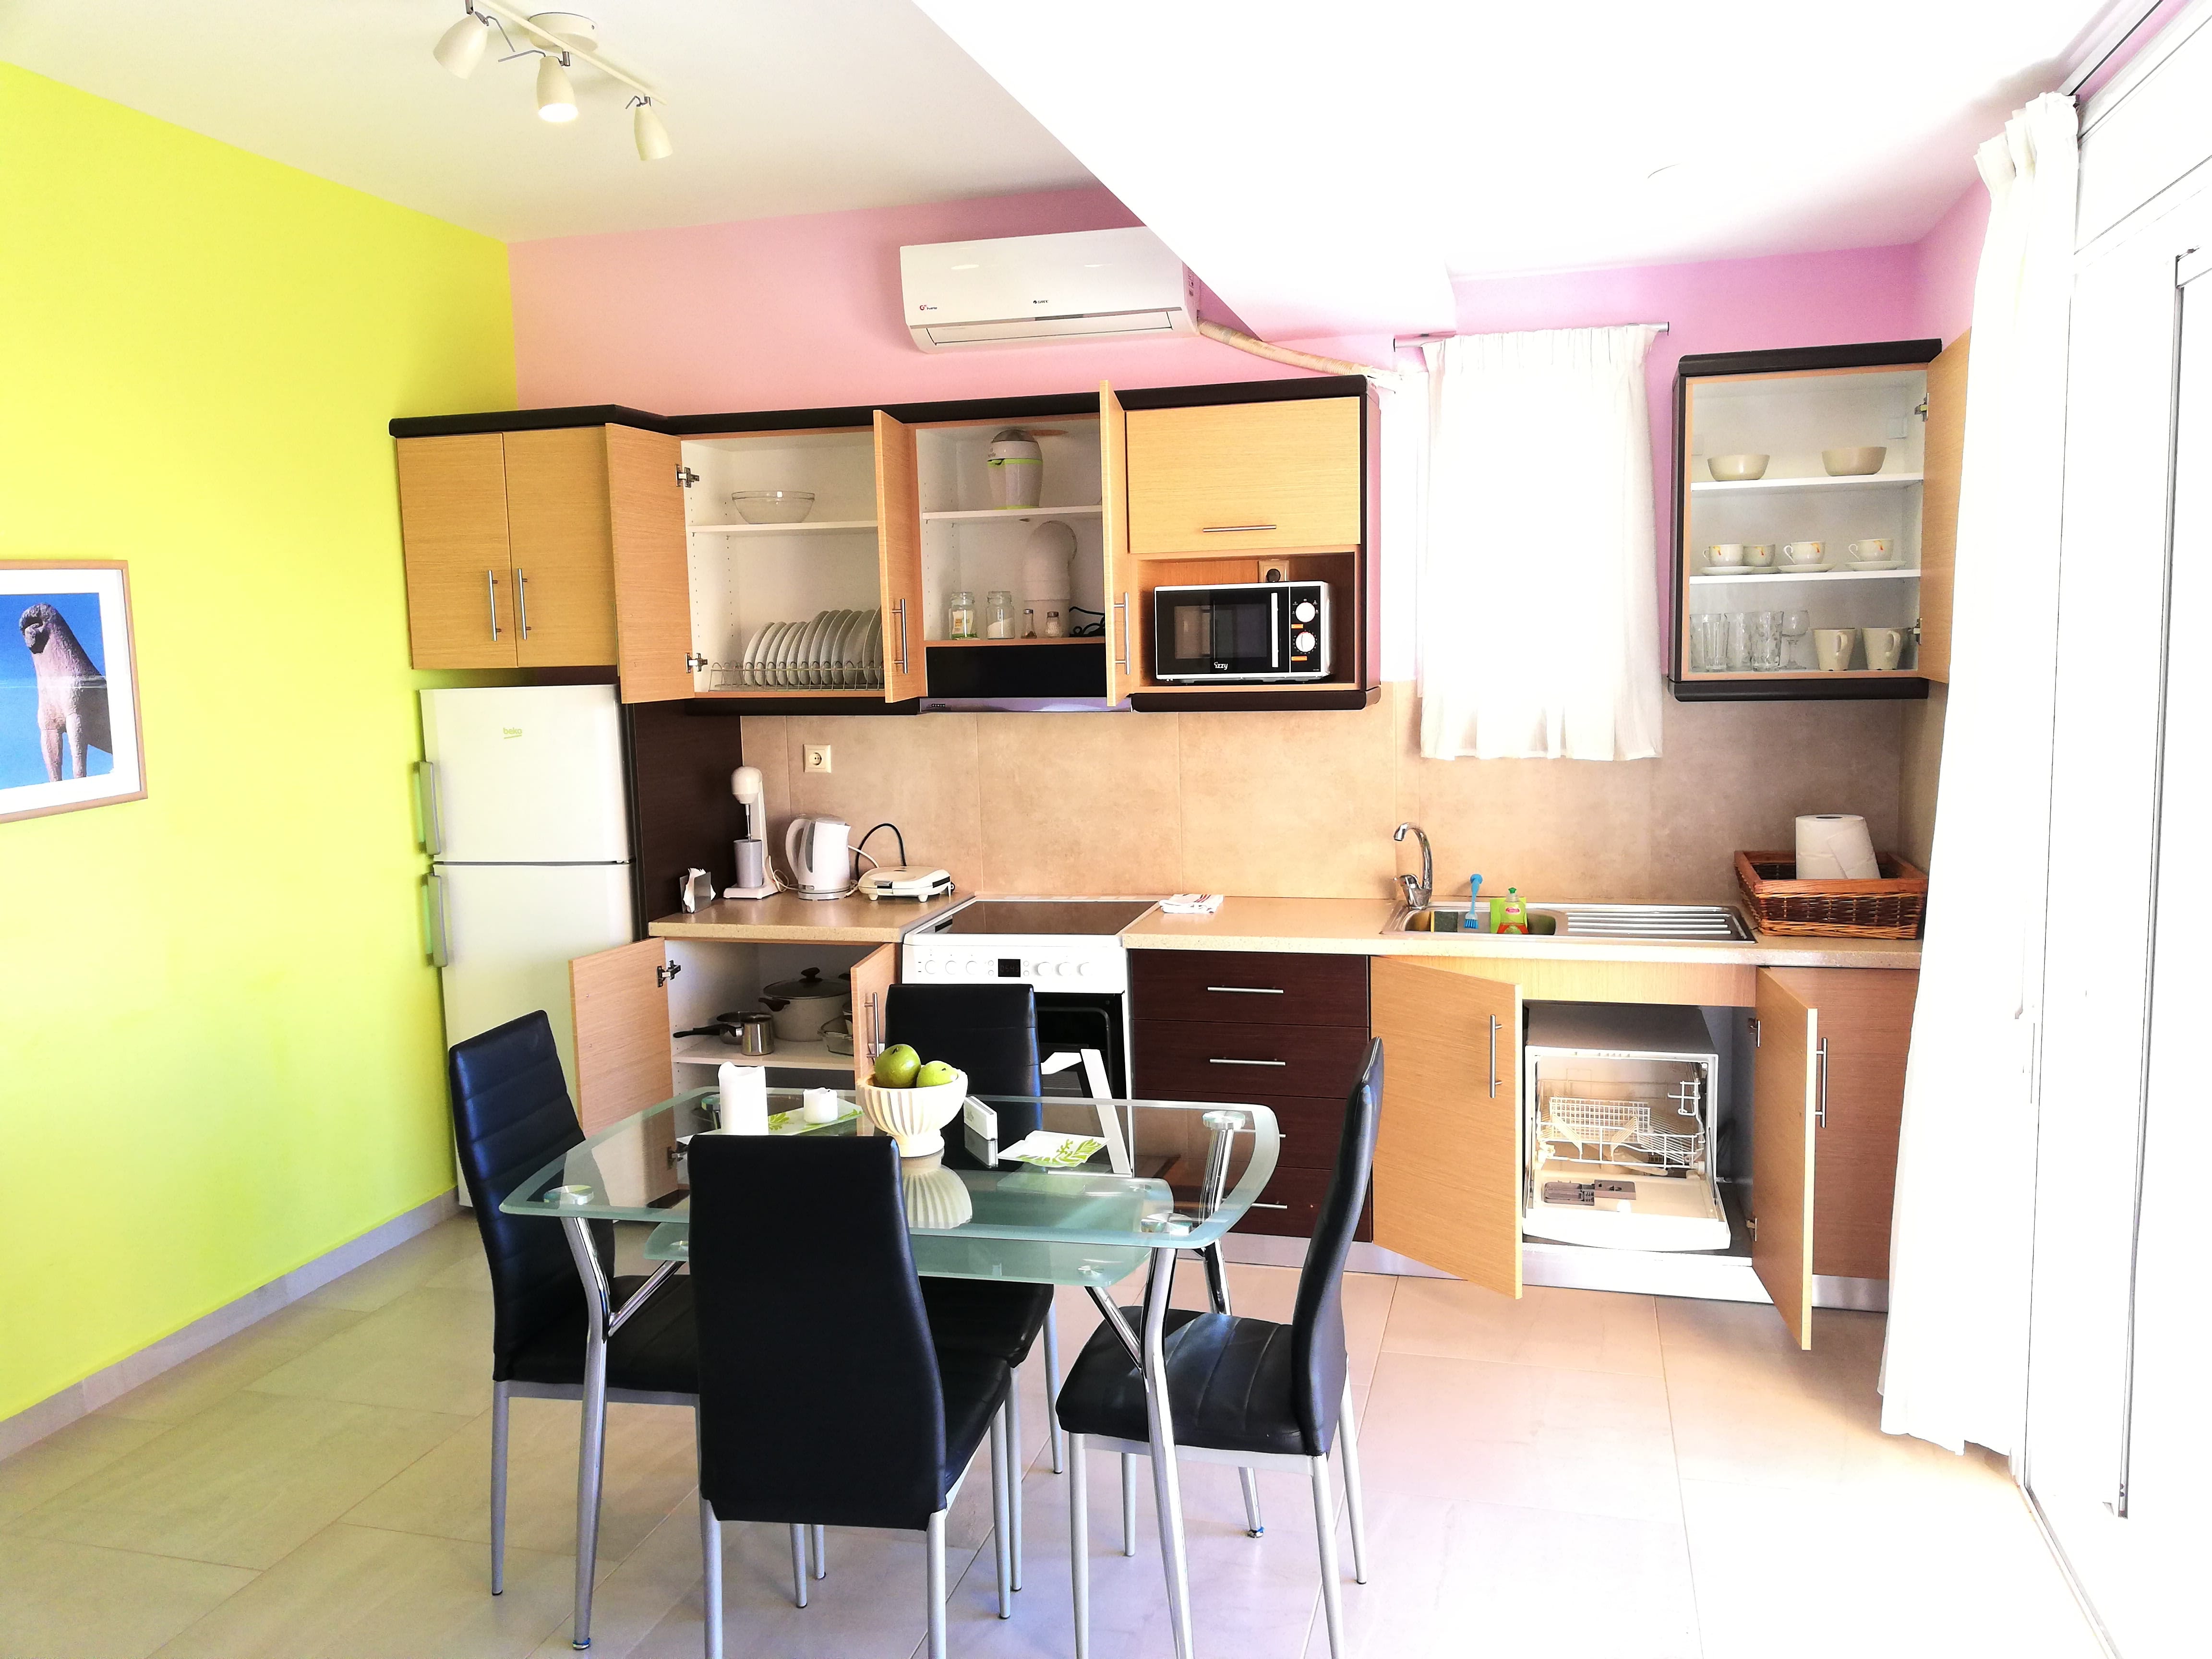 Air-conditioned kitchen , equipped with everything you need!